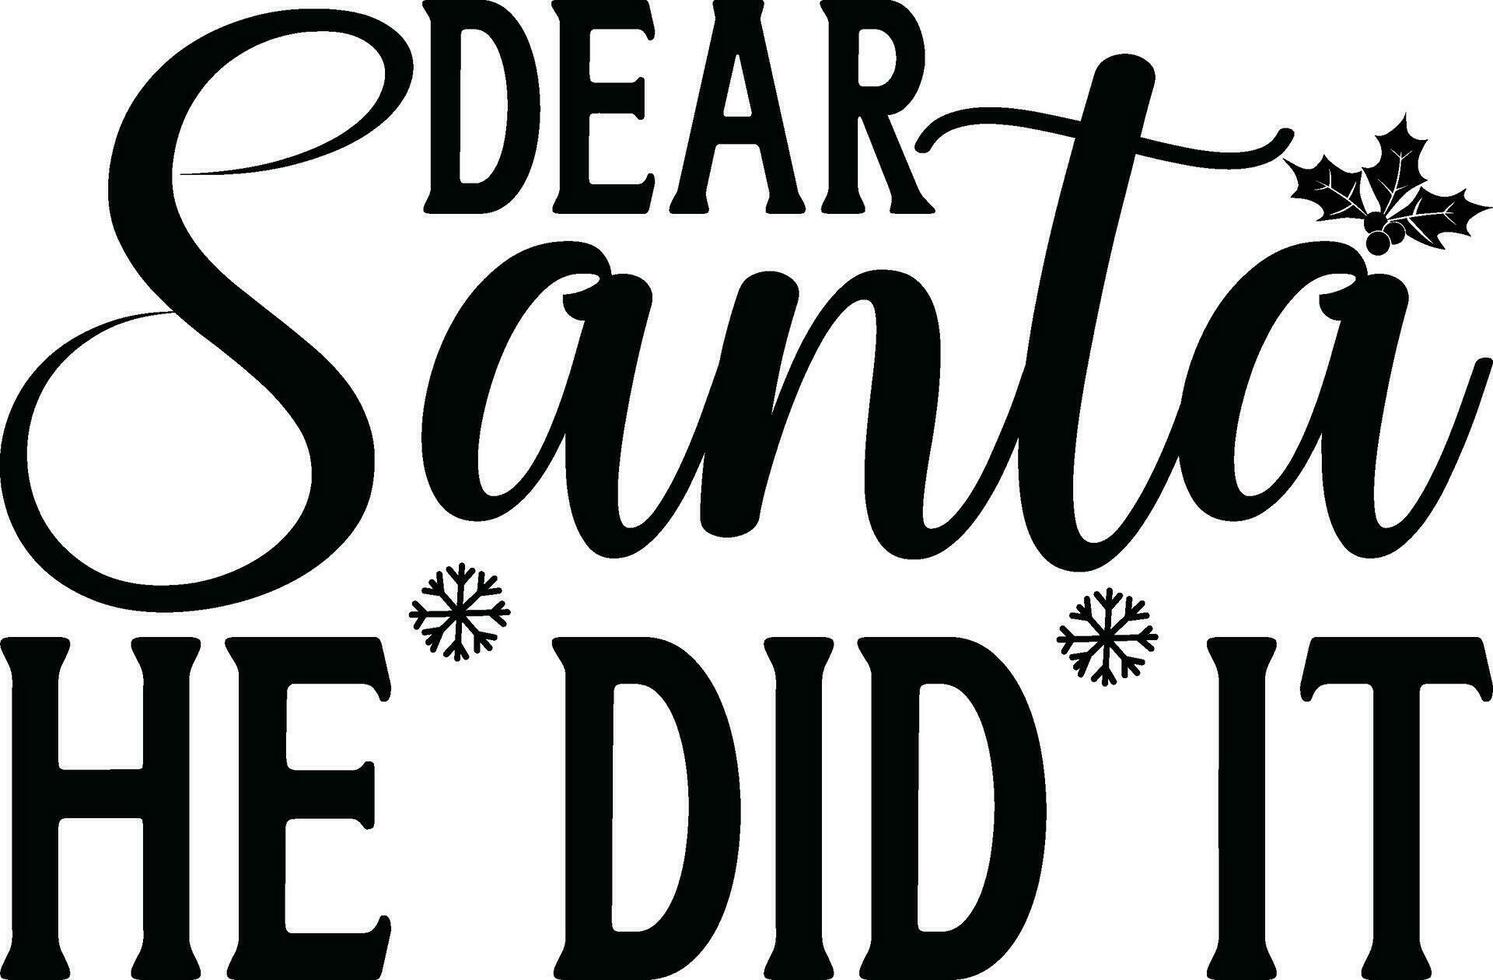 Christmas Lettering design for greeting banners, Mouse Pads, Prints, Cards and Posters, Mugs, Notebooks, Floor Pillows and T-shirt prints design. vector